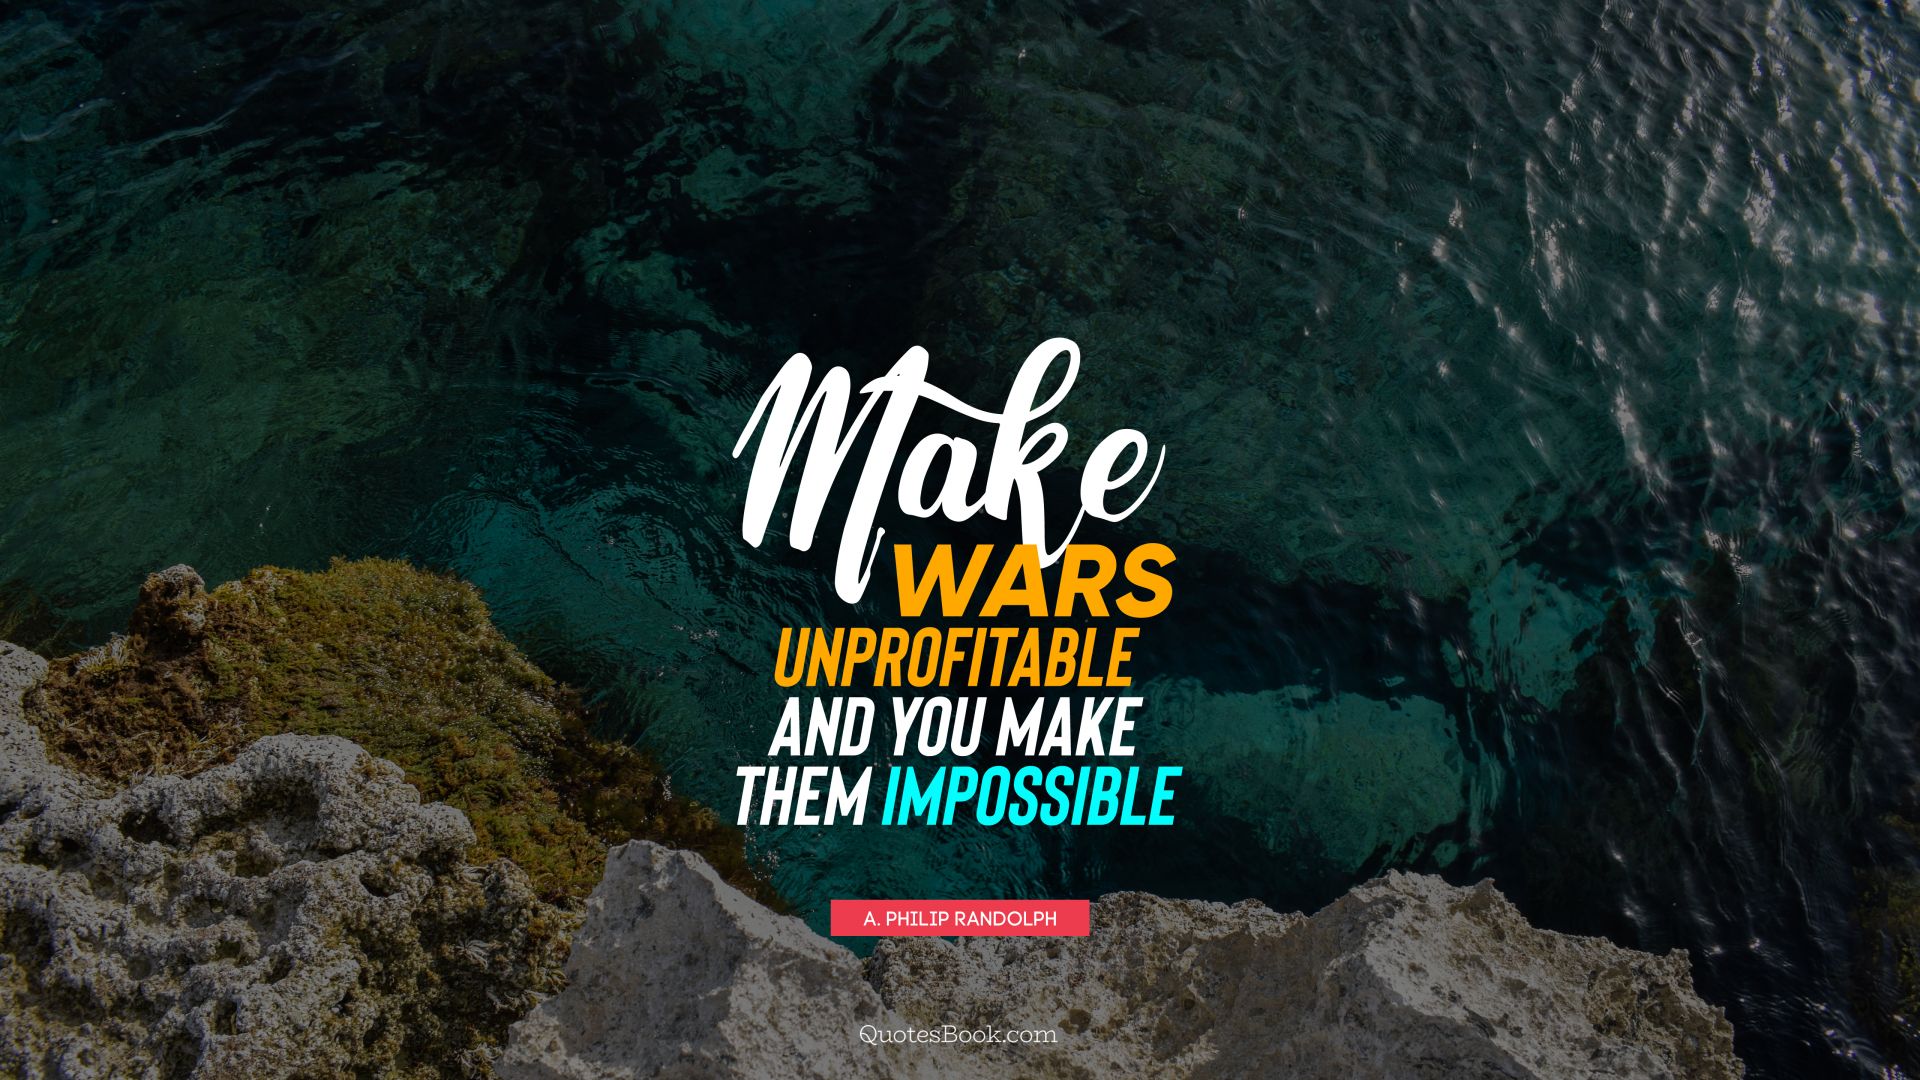 Make wars unprofitable and you make them impossible. - Quote by A. Philip Randolph